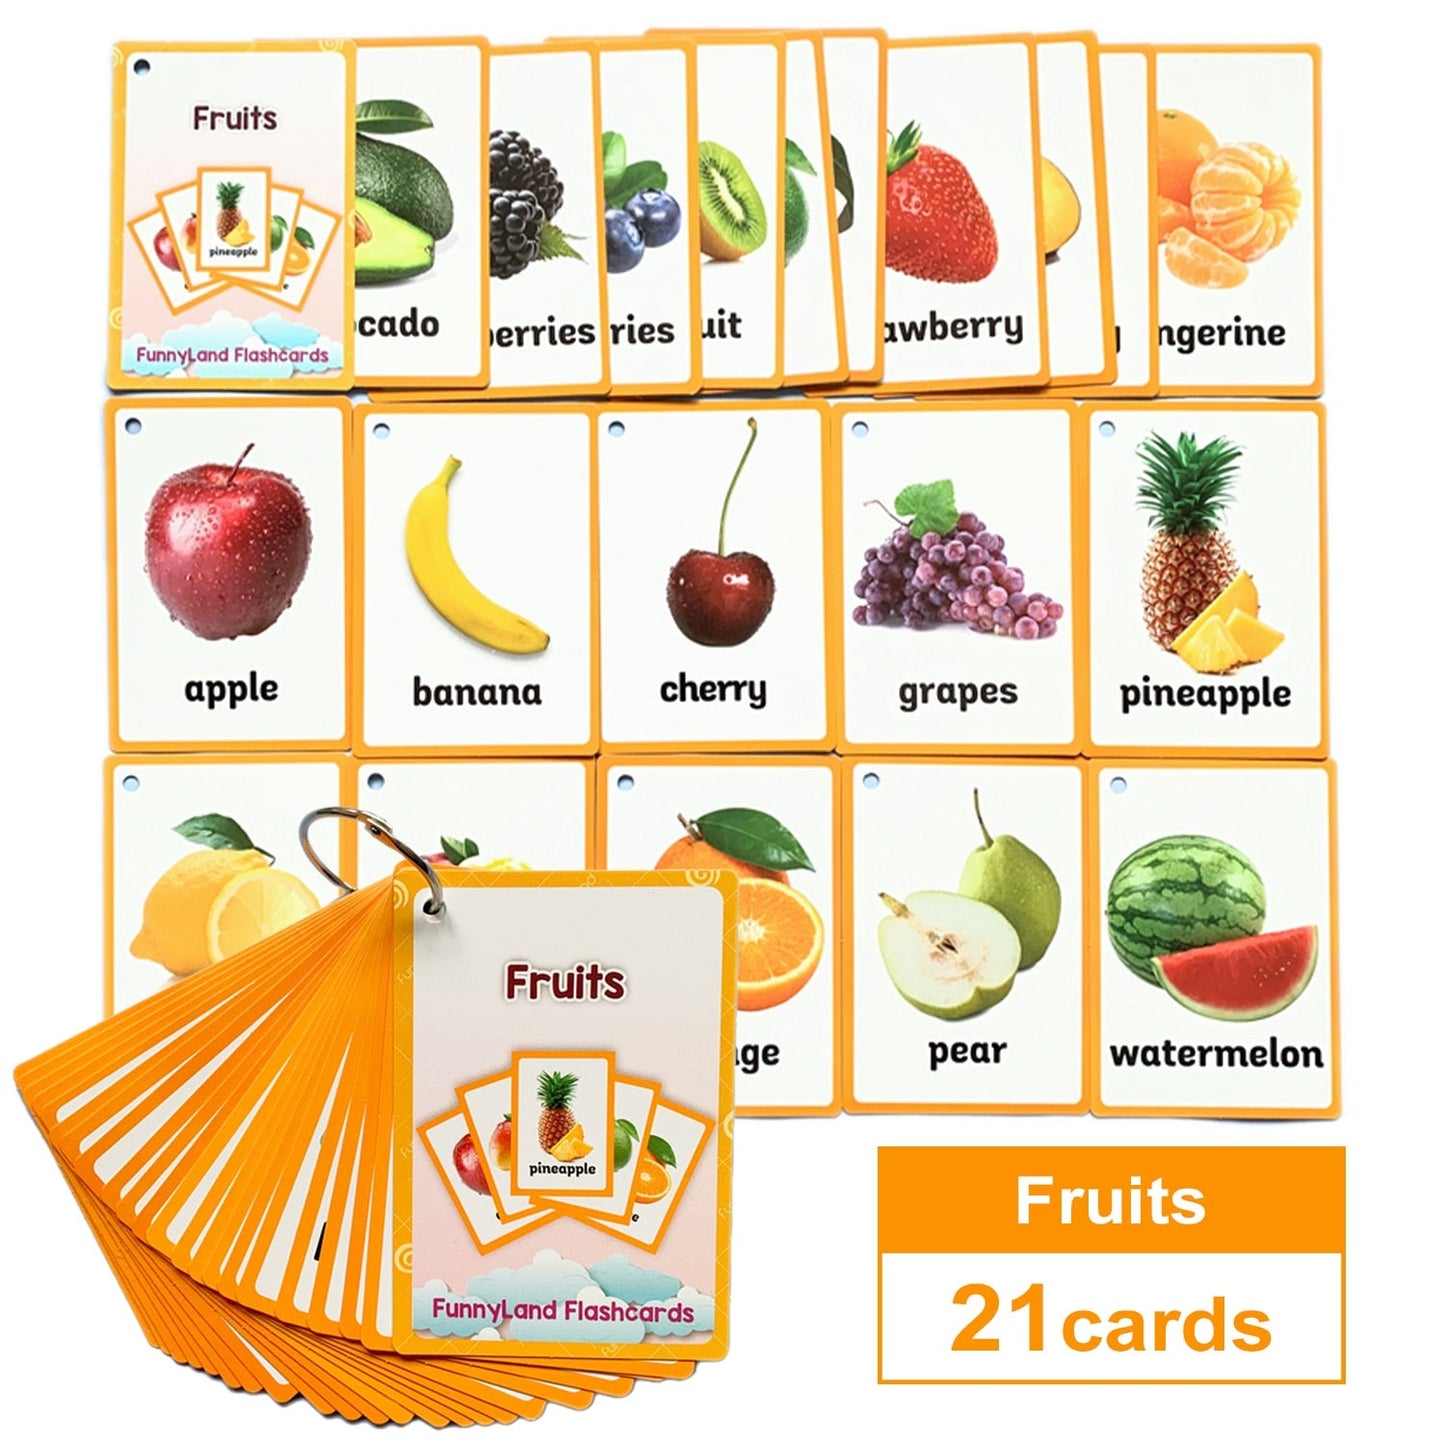 Kinder Baby English Learning Word Pocket Card Flashcard Montessori Learning Game Tool Words Table Game Gift for Kids Teach Toyland EU Toyland EU